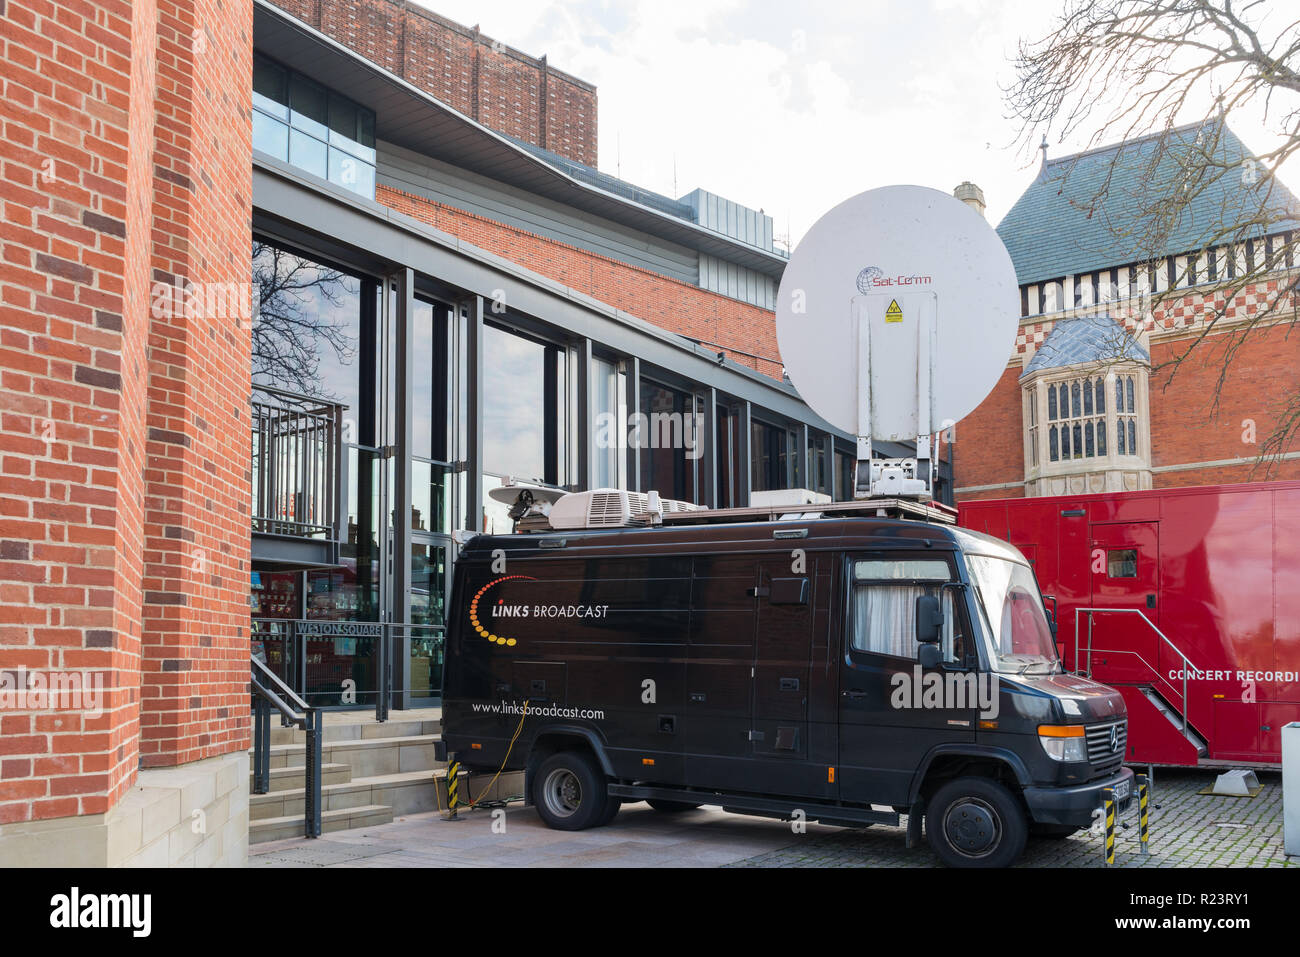 Outside broadcast van with large satellite dish outside the Royal Shakespeare Theatre in Stratford-upon-Avon, Warwickshire Stock Photo